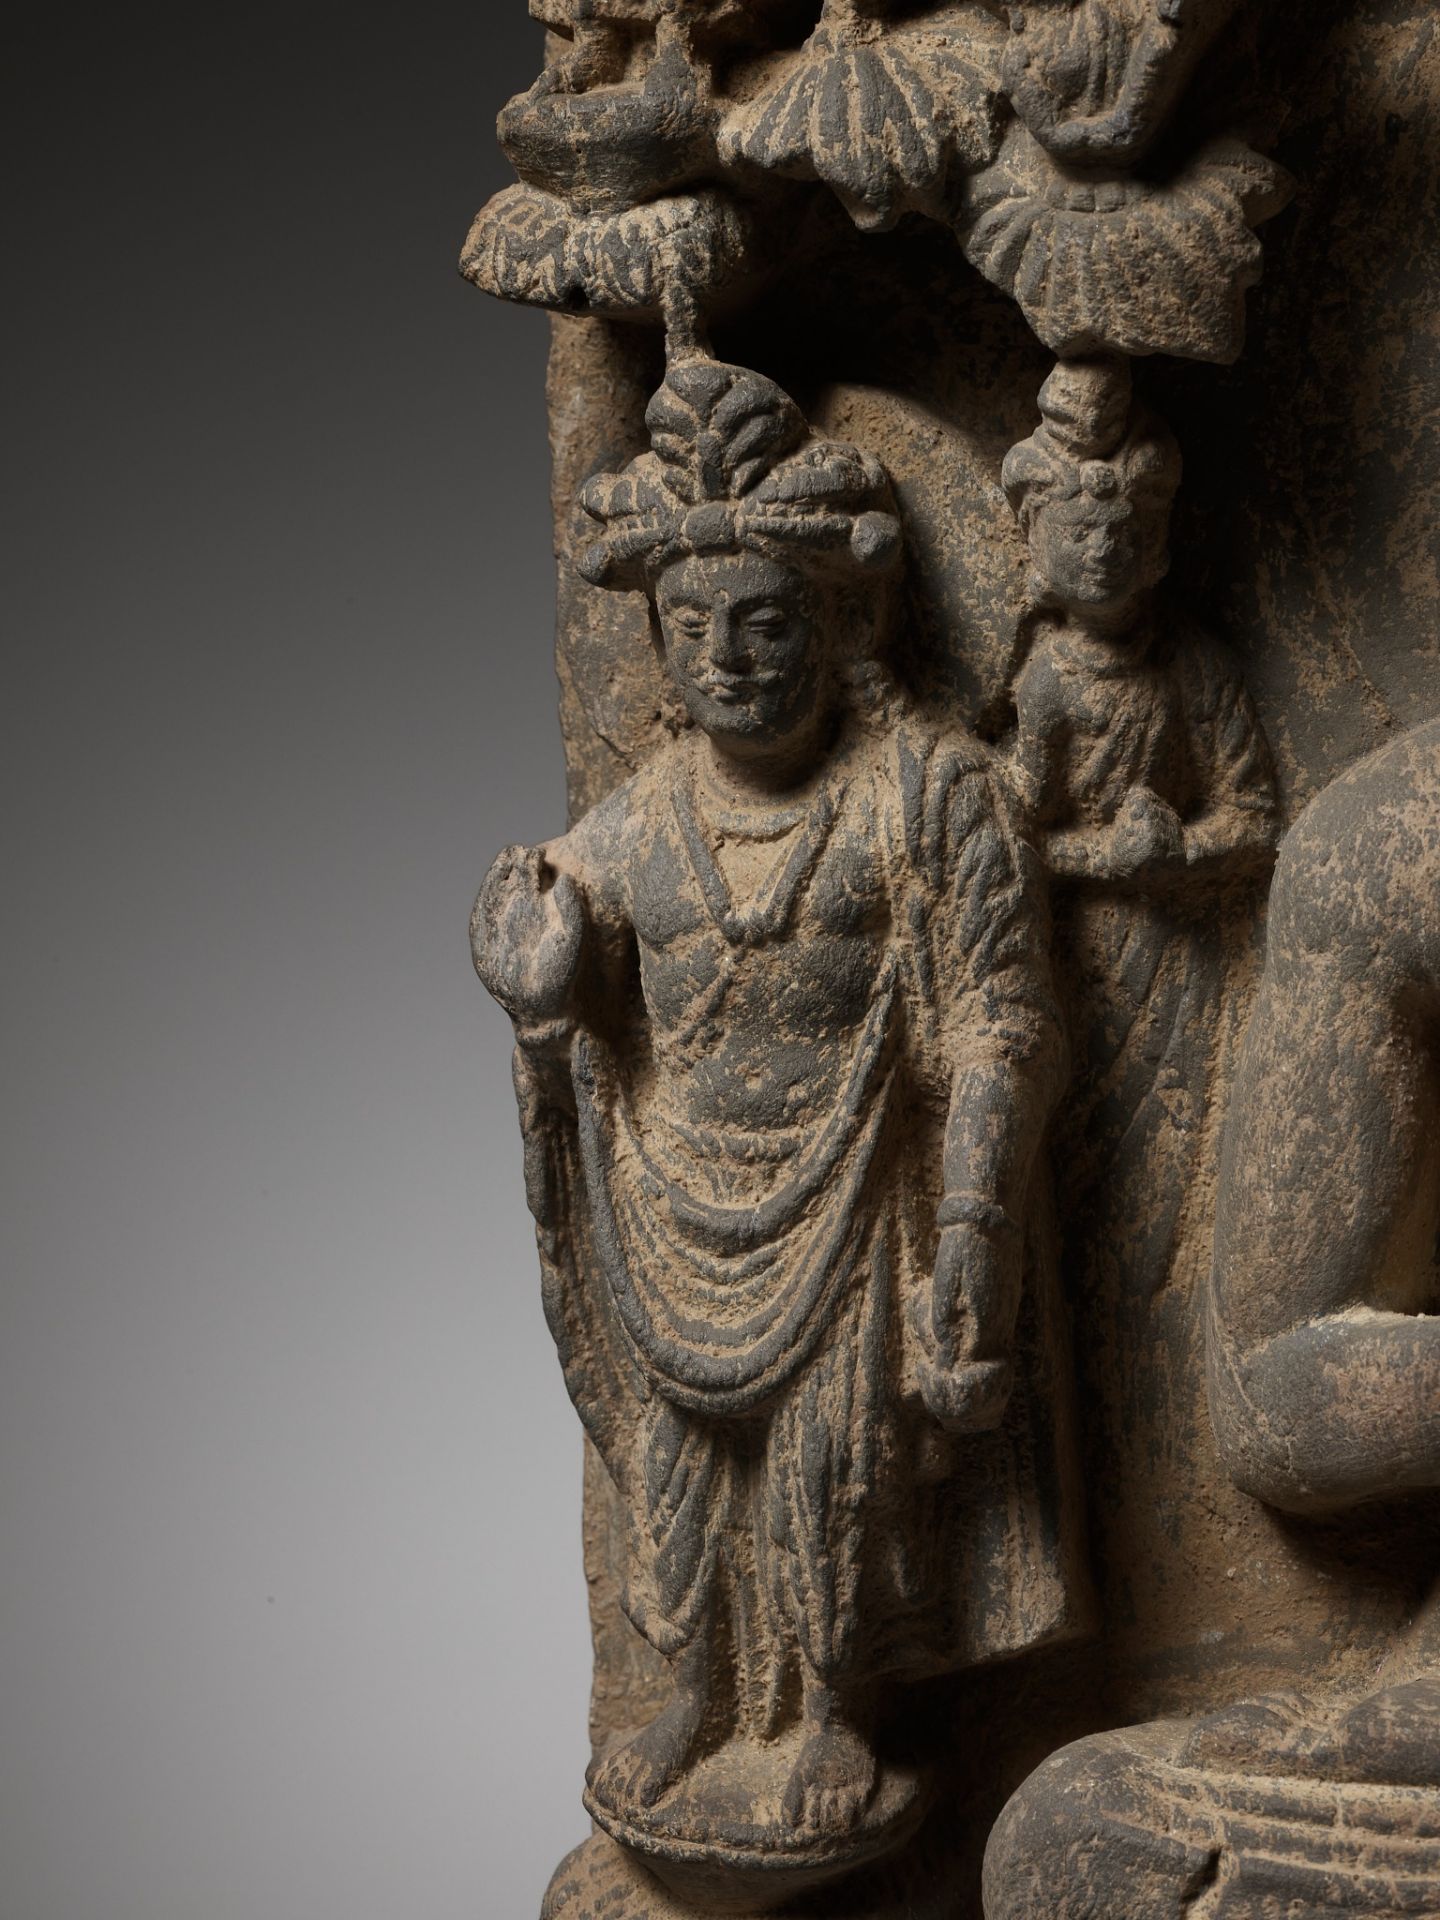 A SCHIST STELE DEPICTING BUDDHA, ANCIENT REGION OF GANDHARA, 3RD-4TH CENTURY - Image 9 of 11